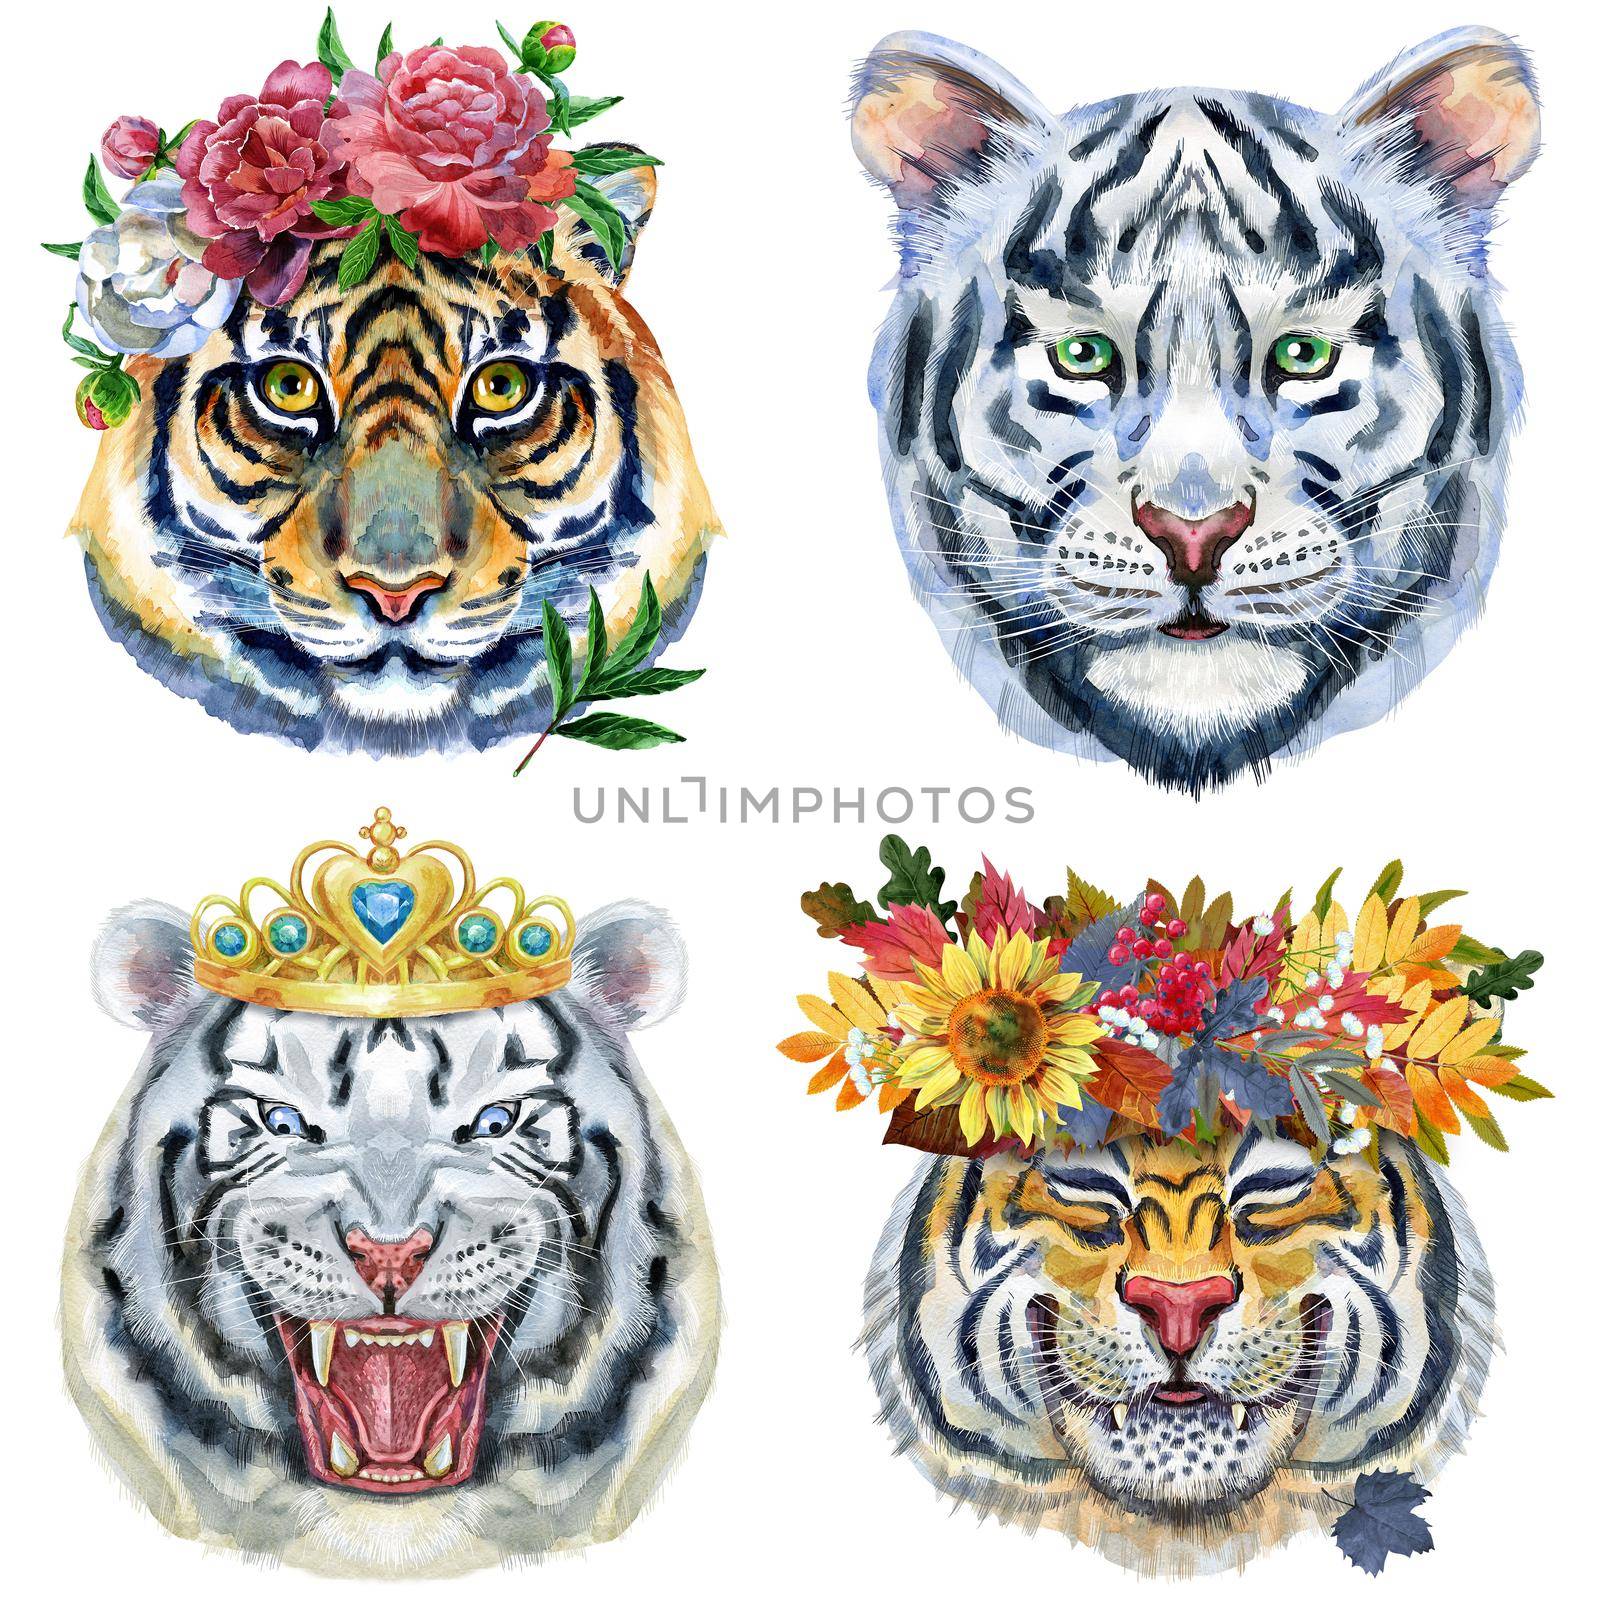 Watercolor illustration of tigers in wreaths of autumn leaves, peonies and a golden crown